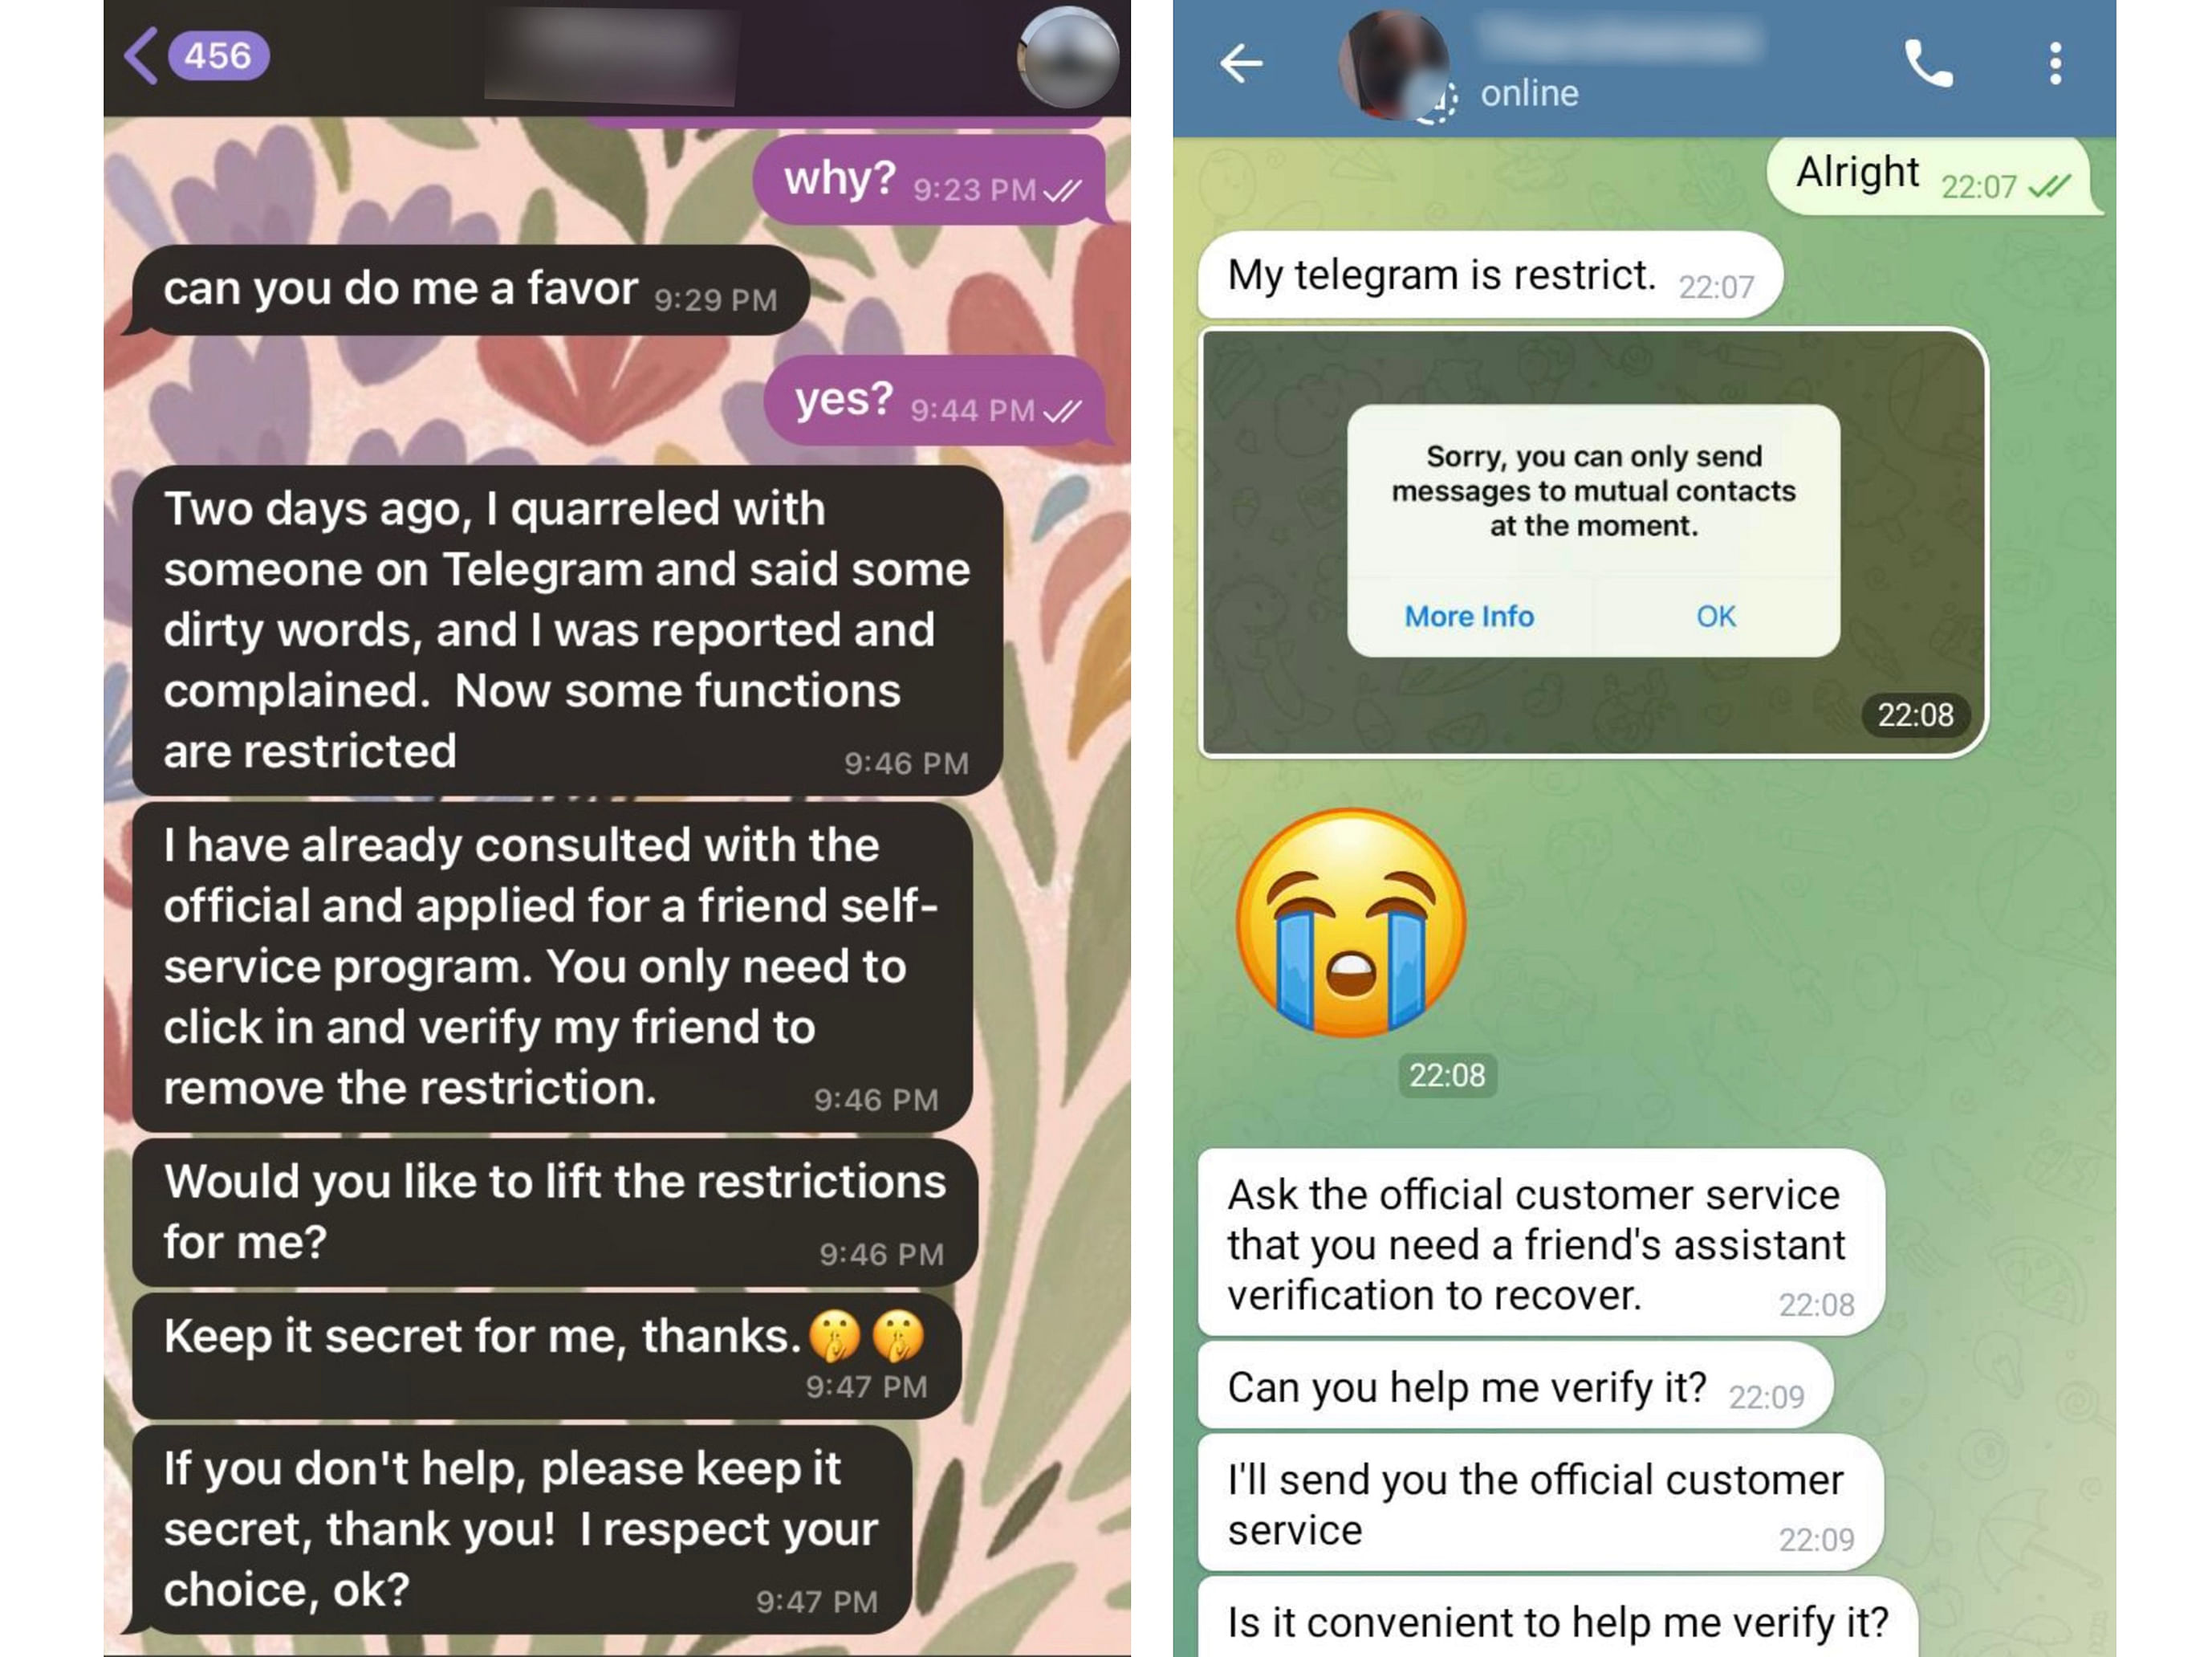 More than 50 people duped by scammers through Telegram this year The